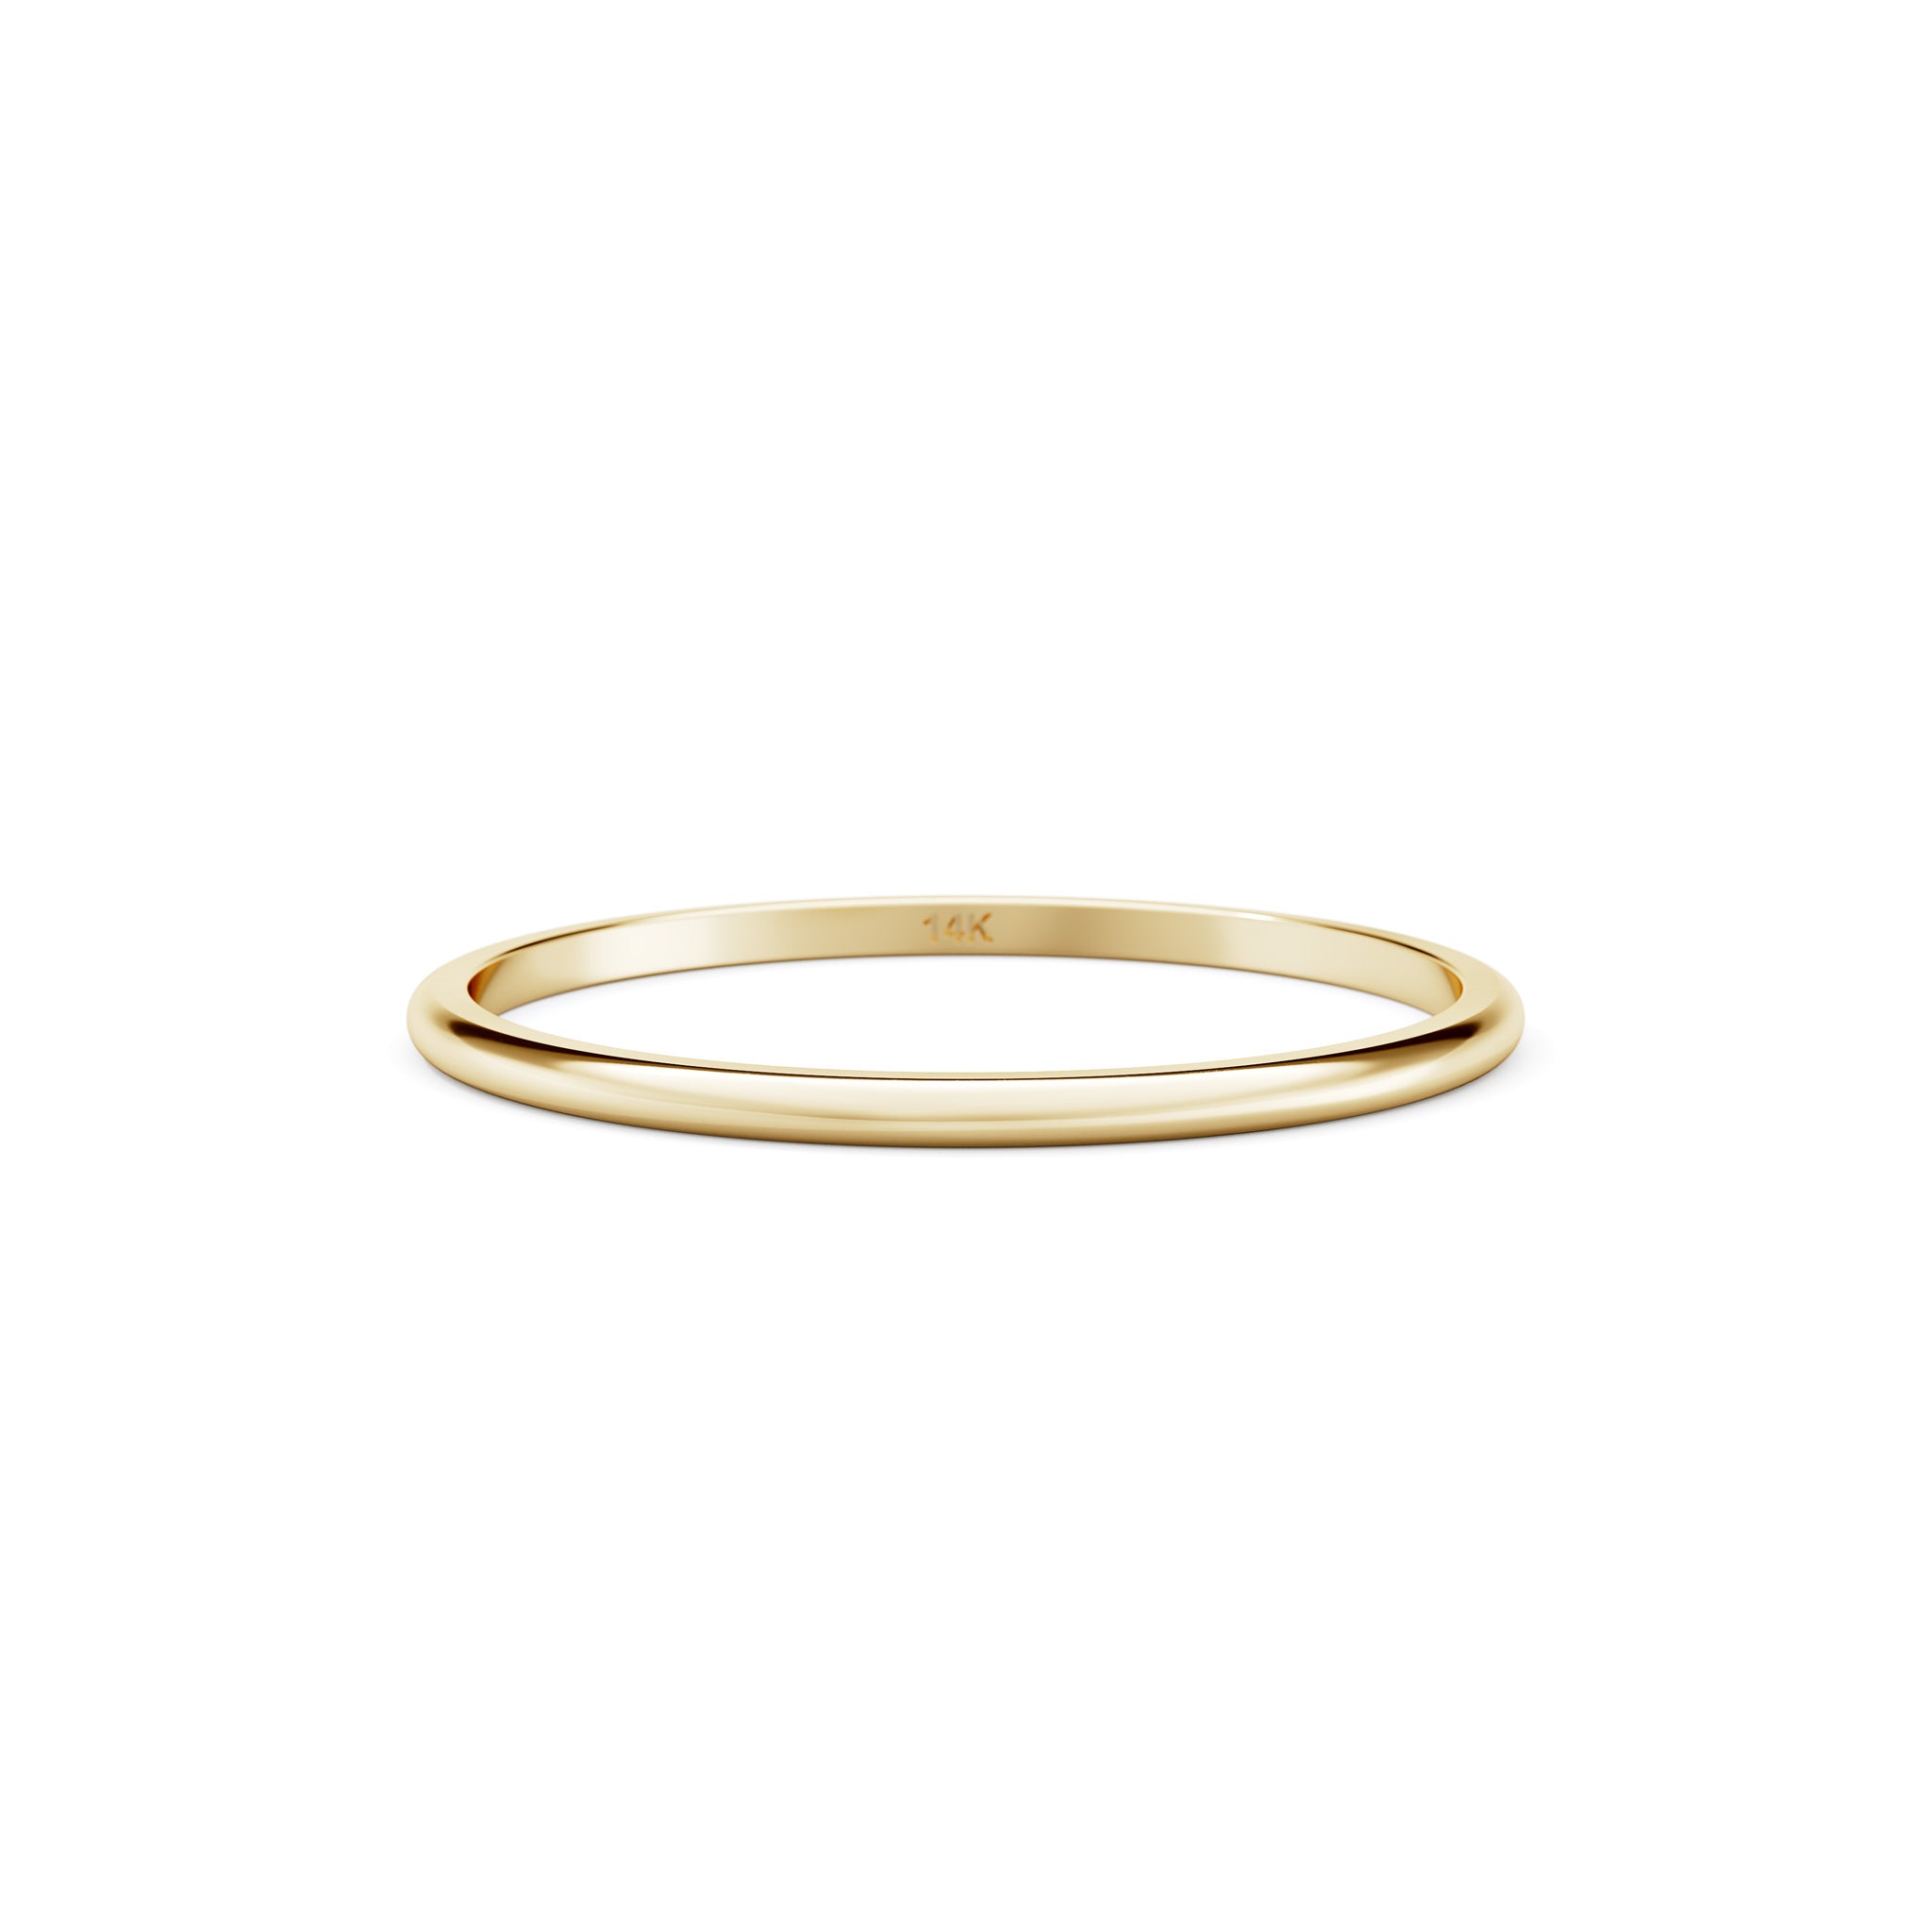 Thin Stacking Band Ring in 14k Gold